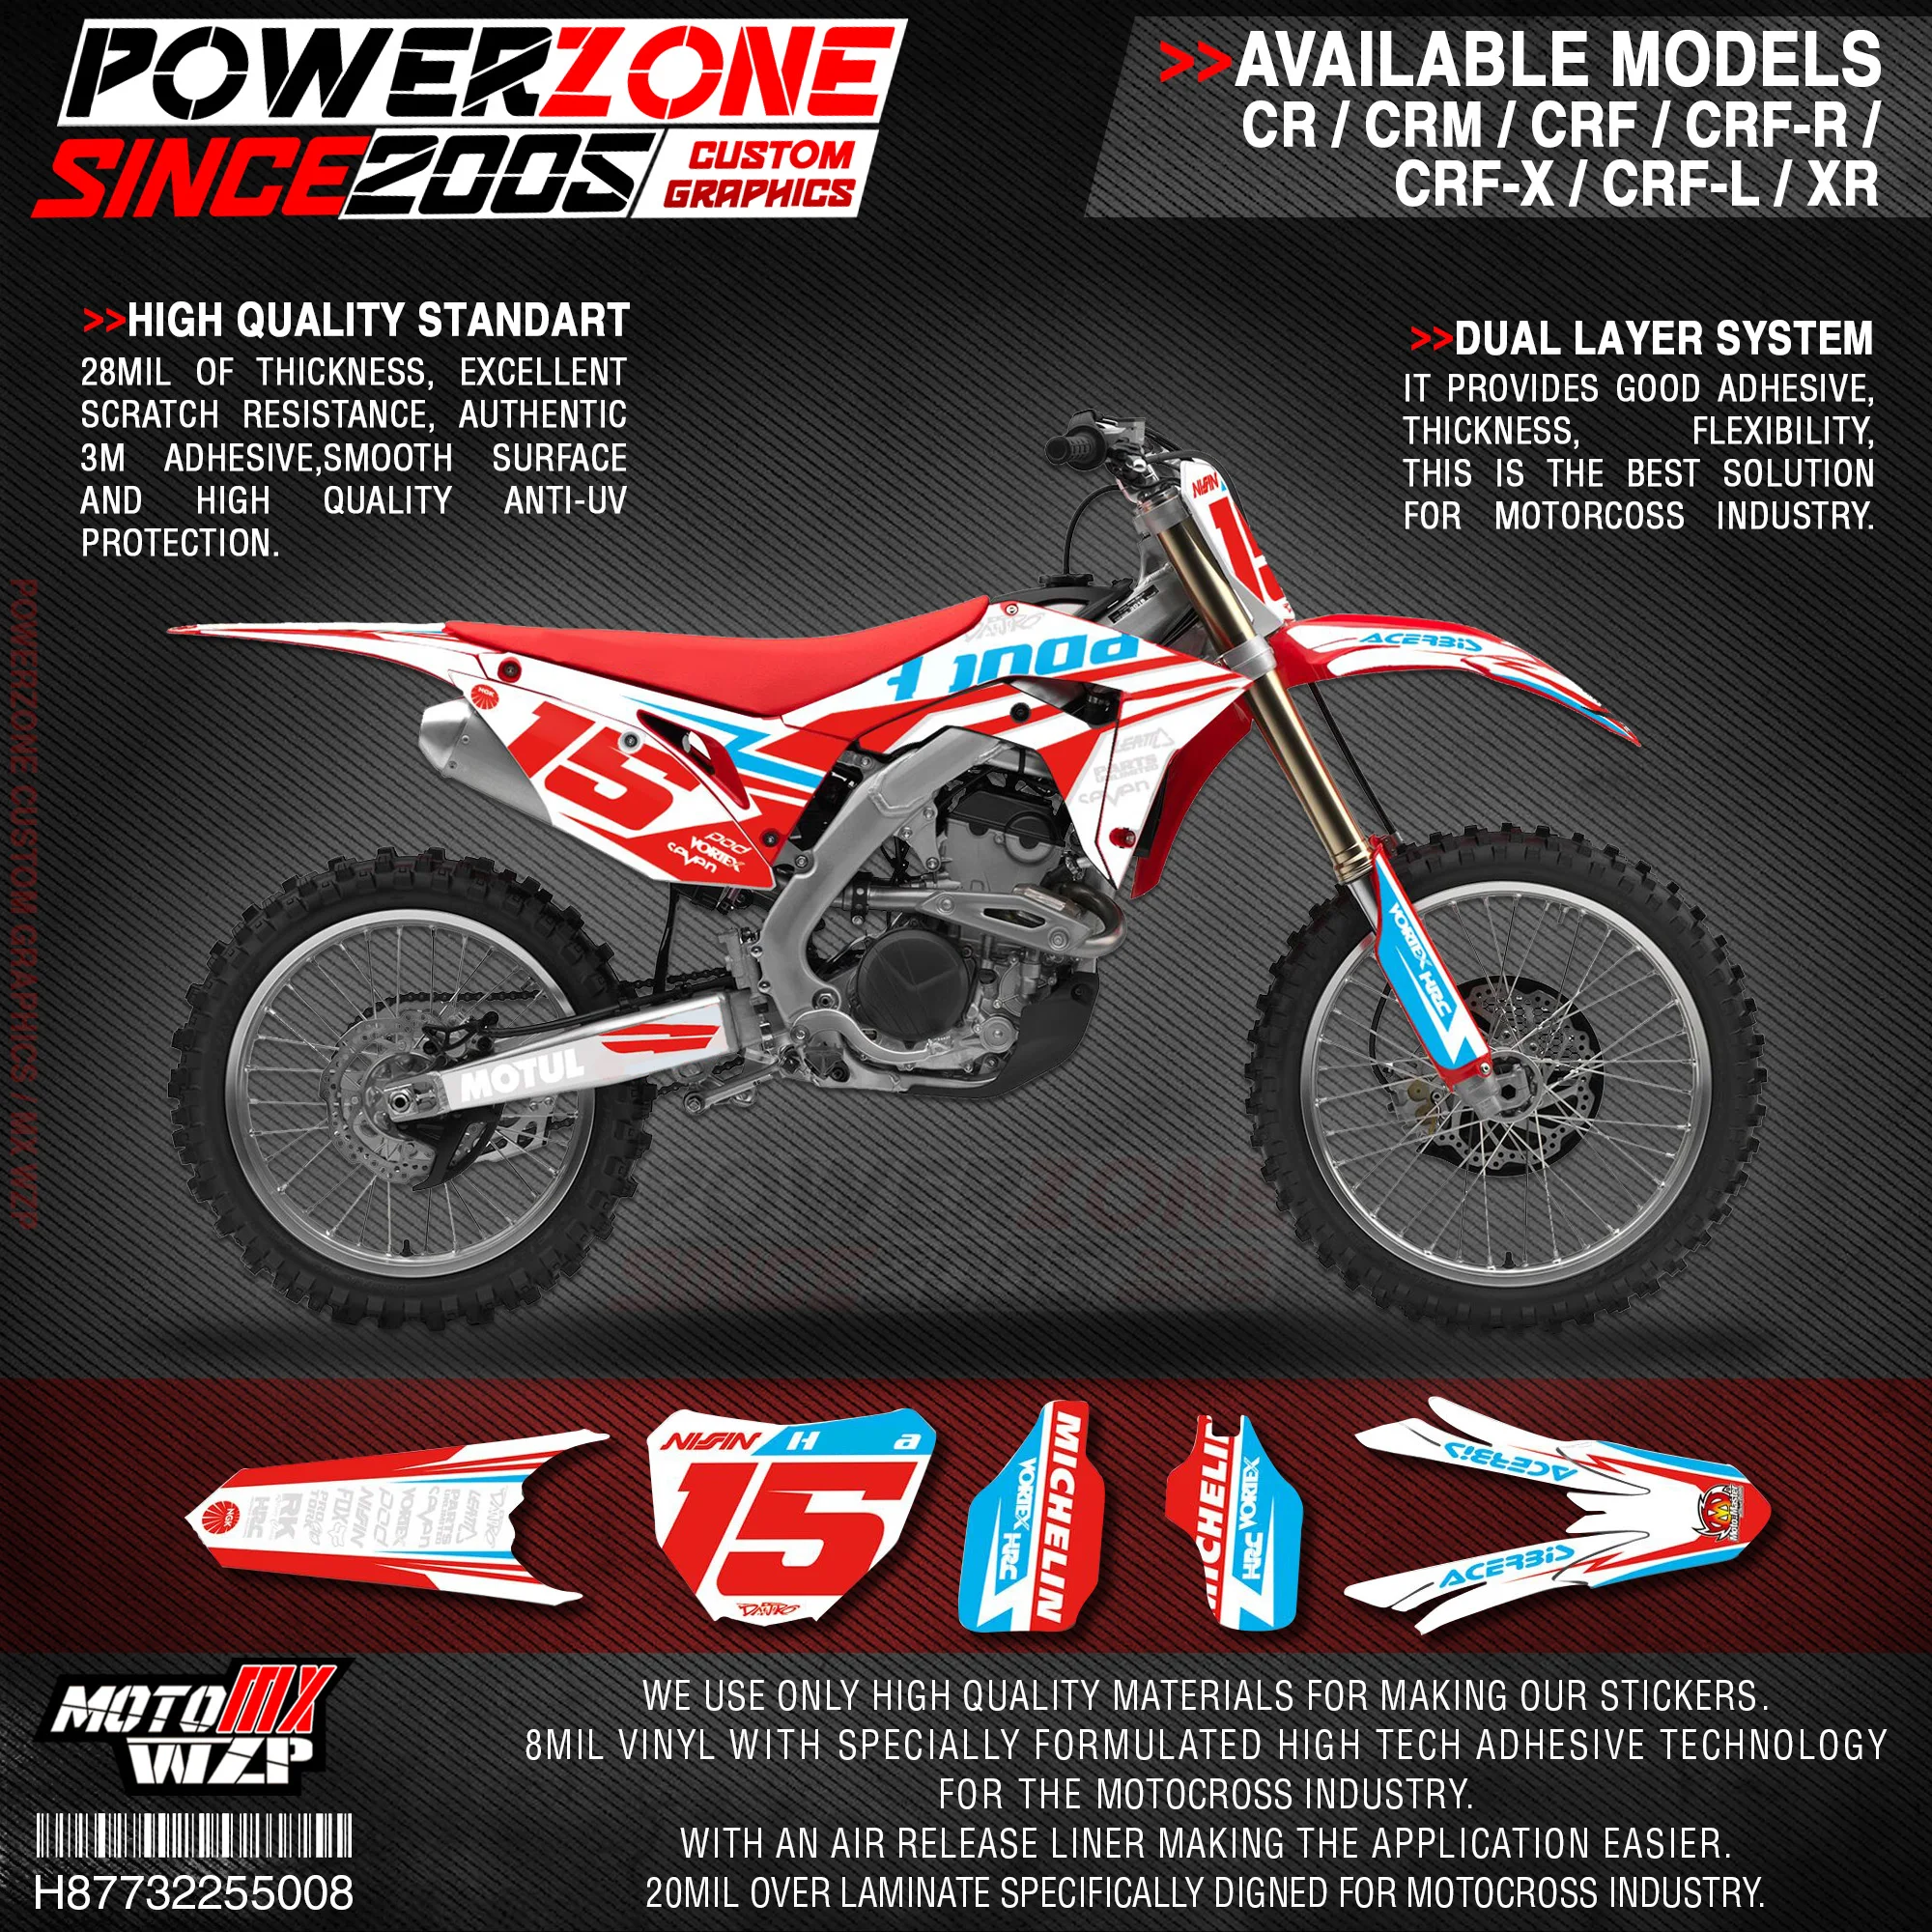 

PowerZone Custom Team Graphics Backgrounds Decals 3M Stickers Kit For HONDA CRF250R 2018-2019 CRF450R 2017-2019 008